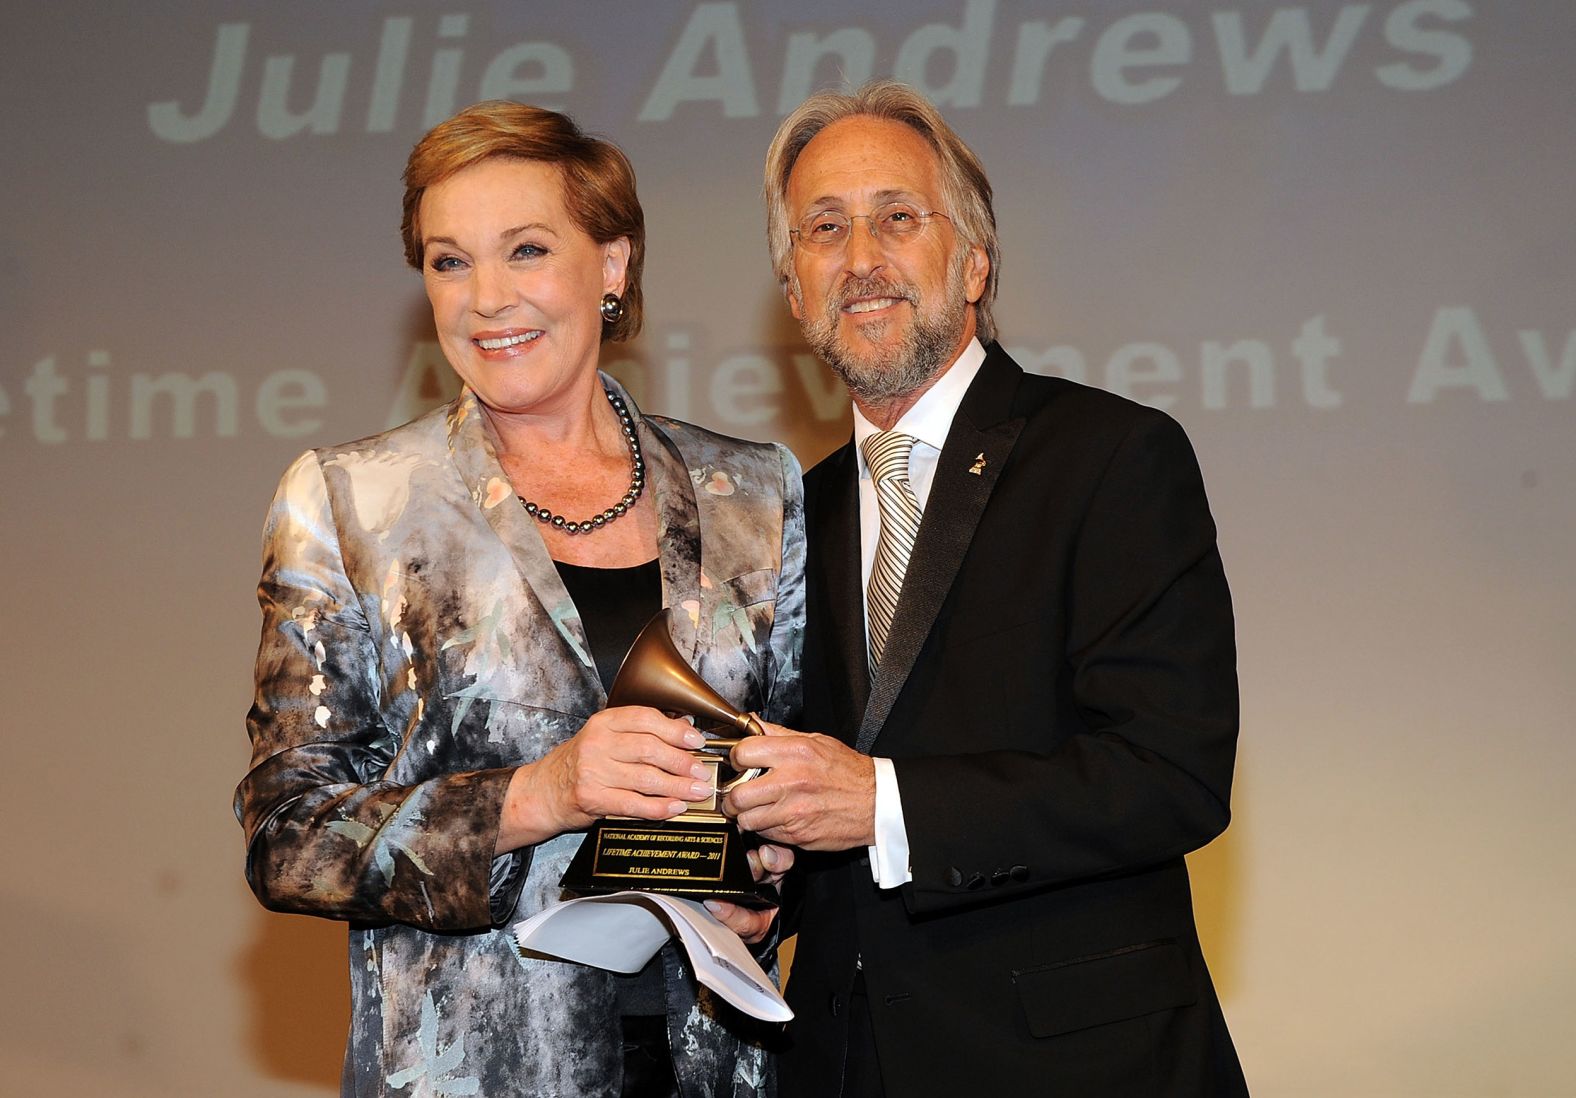 Andrews receives a Grammy Lifetime Achievement Award in 2011. She also won a Grammy that year for best spoken word album for children ("Julie Andrews' Collection of Poems, Songs and Lullabies"). She received her first Grammy in 1965, winning best recording for children ("Mary Poppins").